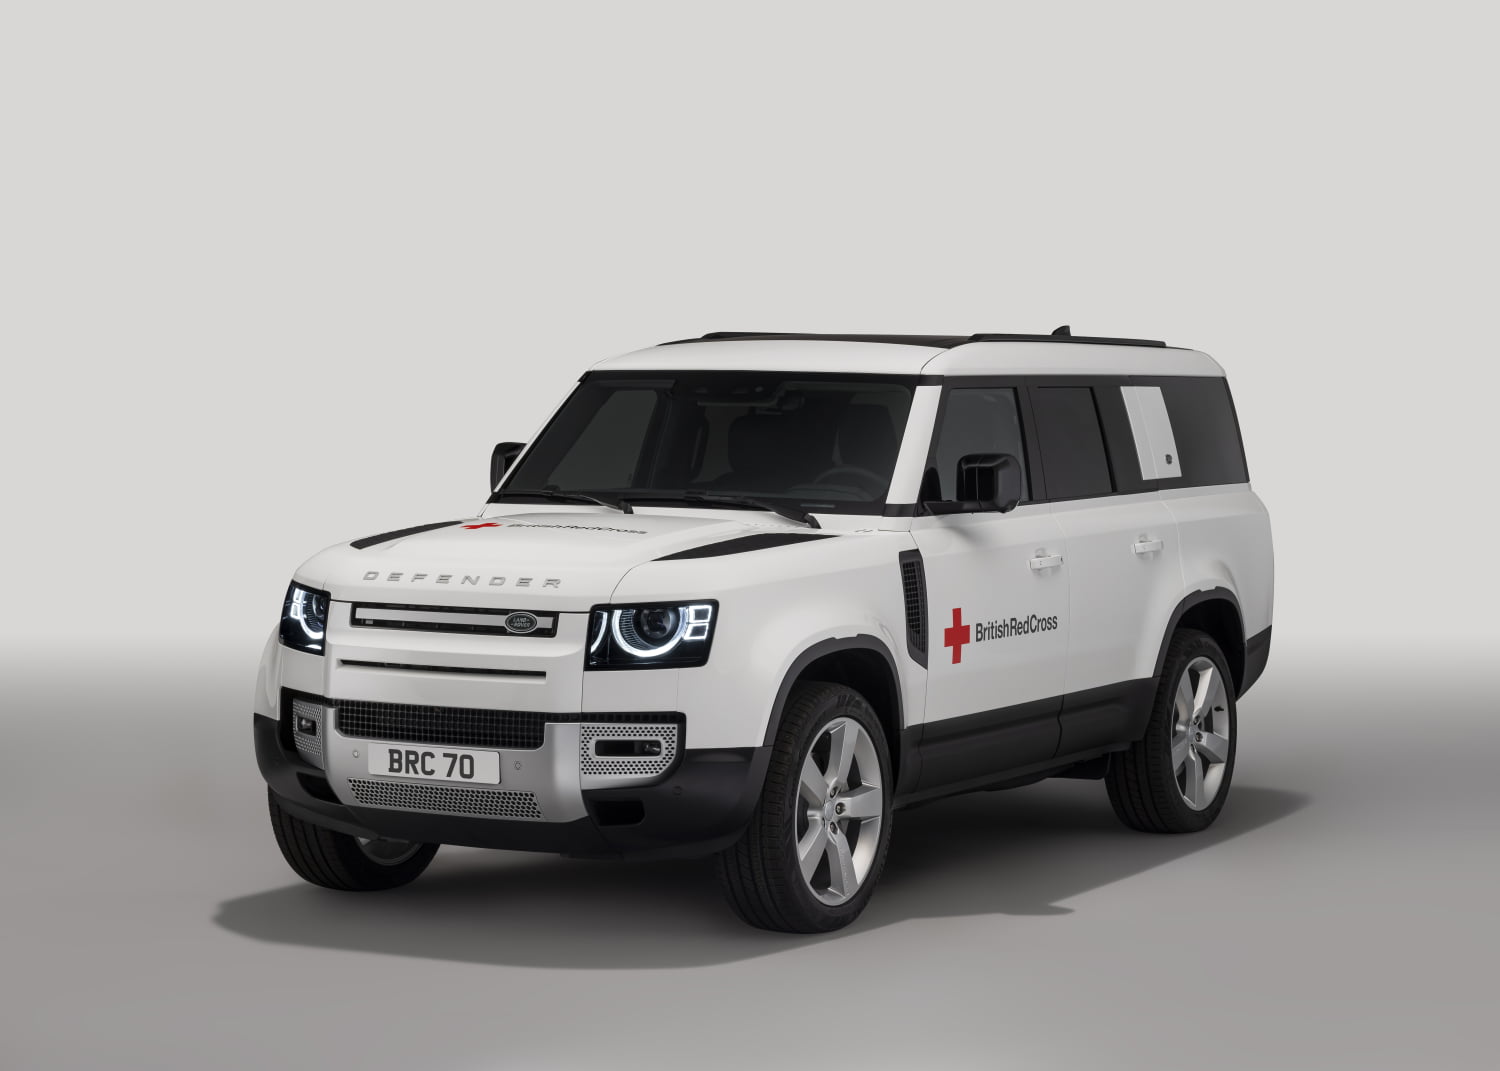 Stretched Land Rover Defender 130 With Three-Rows Revealed! (1)